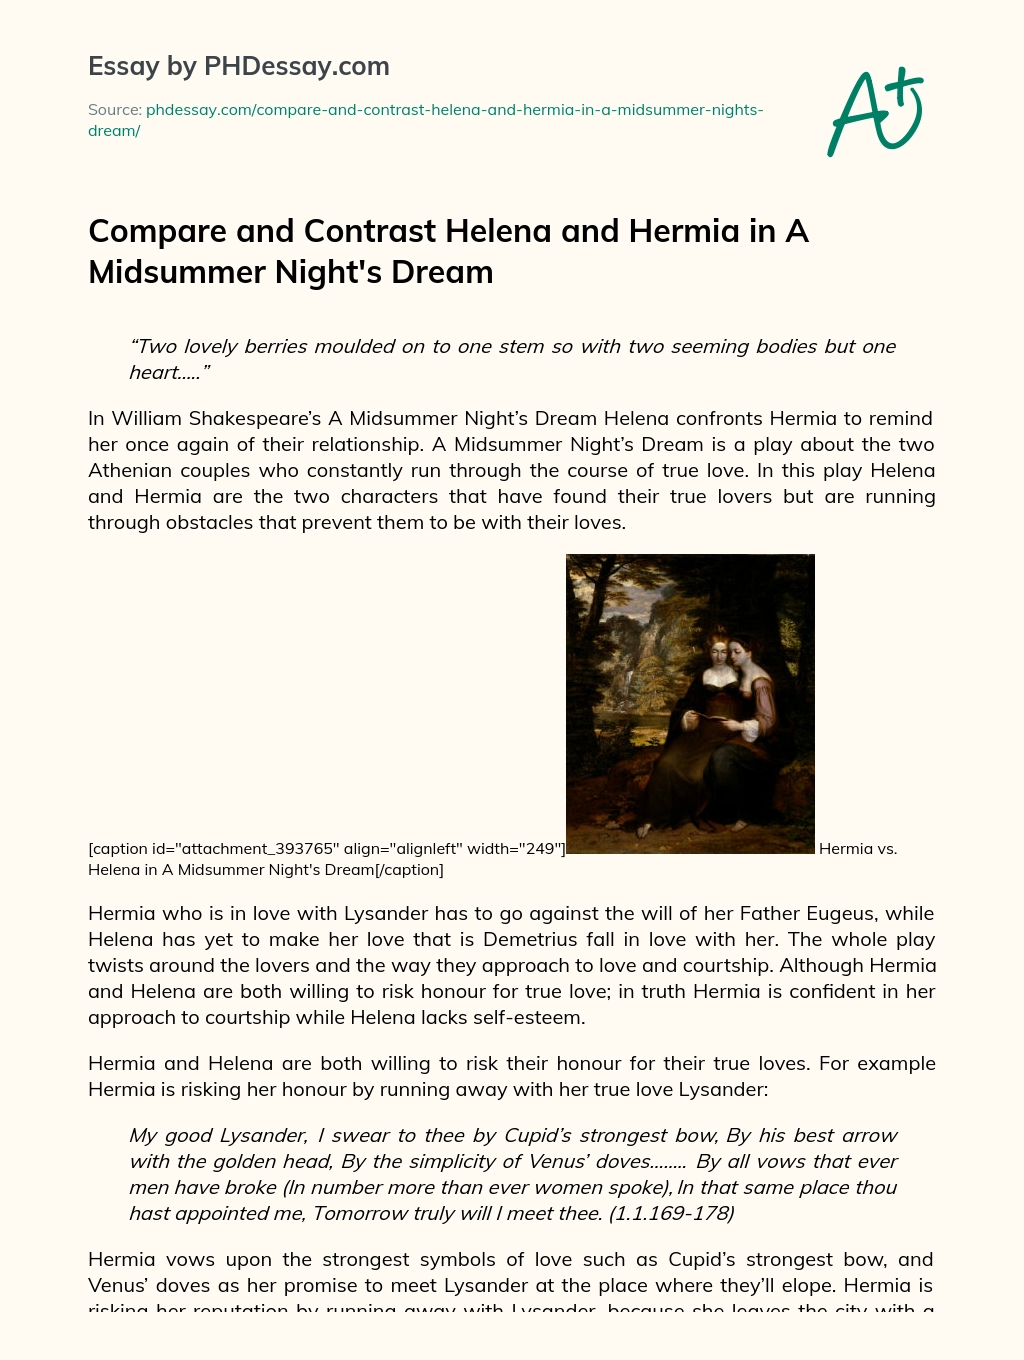 Compare and Contrast Helena and Hermia in A Midsummer Night’s Dream essay